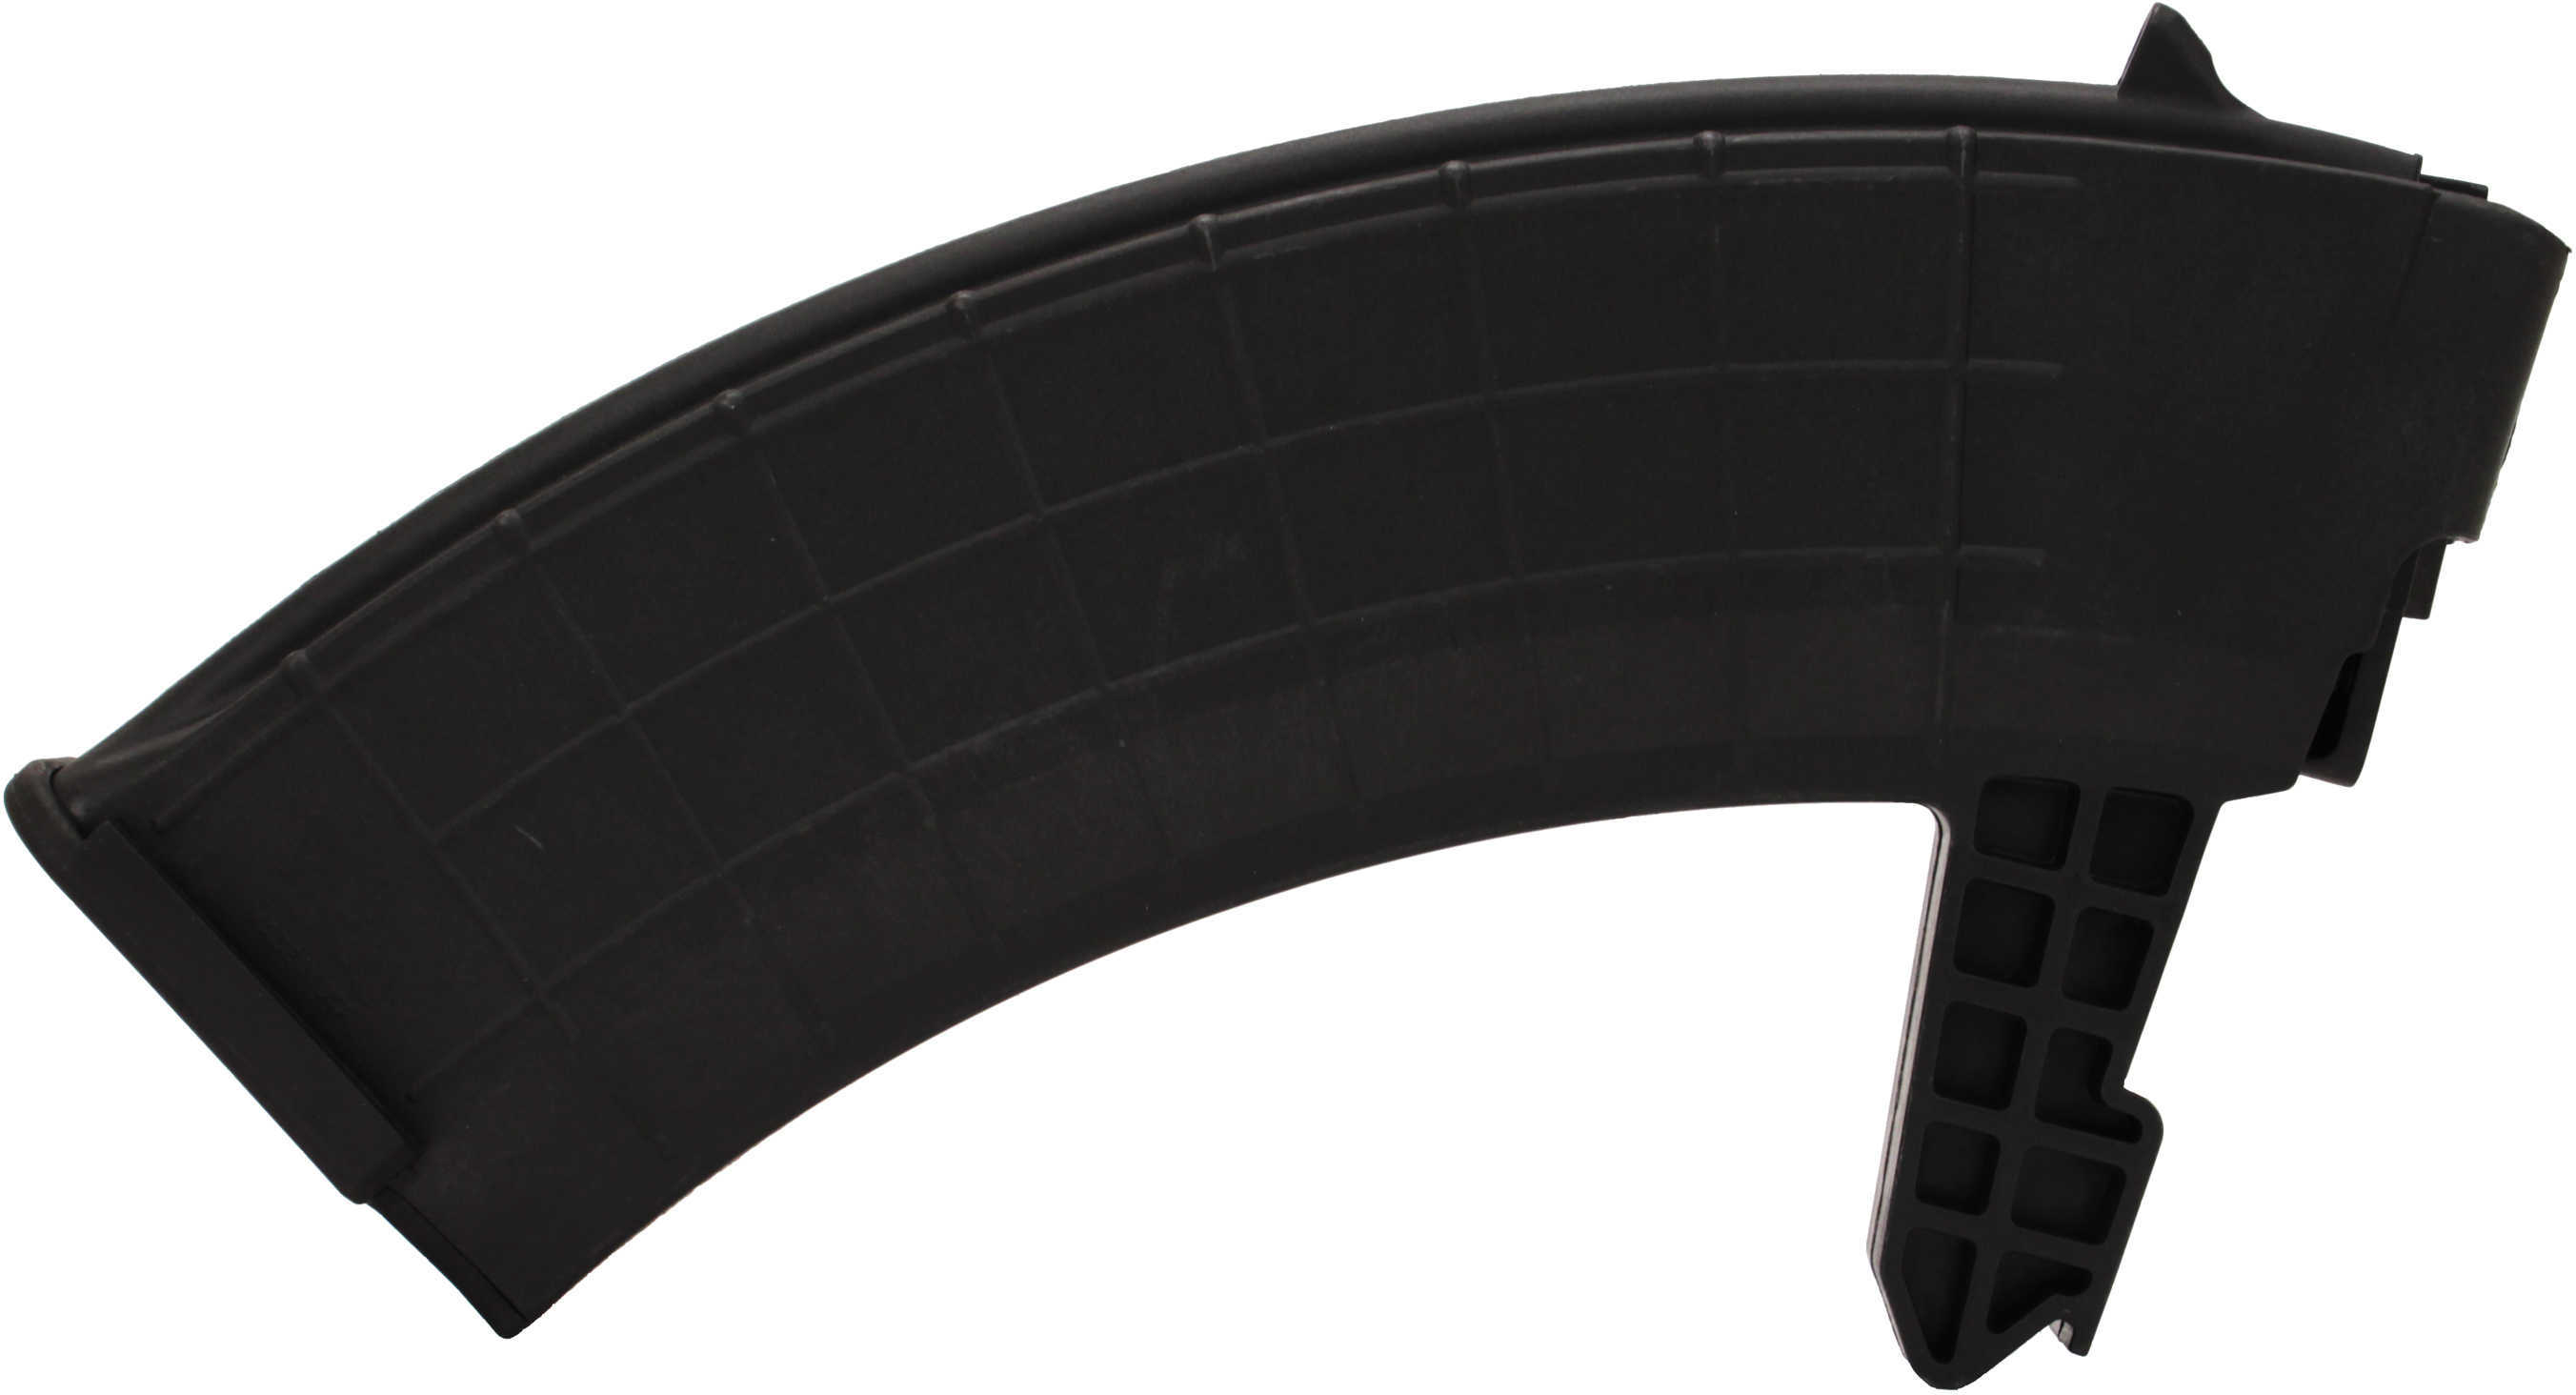 Promag SKS Magazine 7.62X39mm - Black Polymer - 30 Round - Replaces SKS-A1